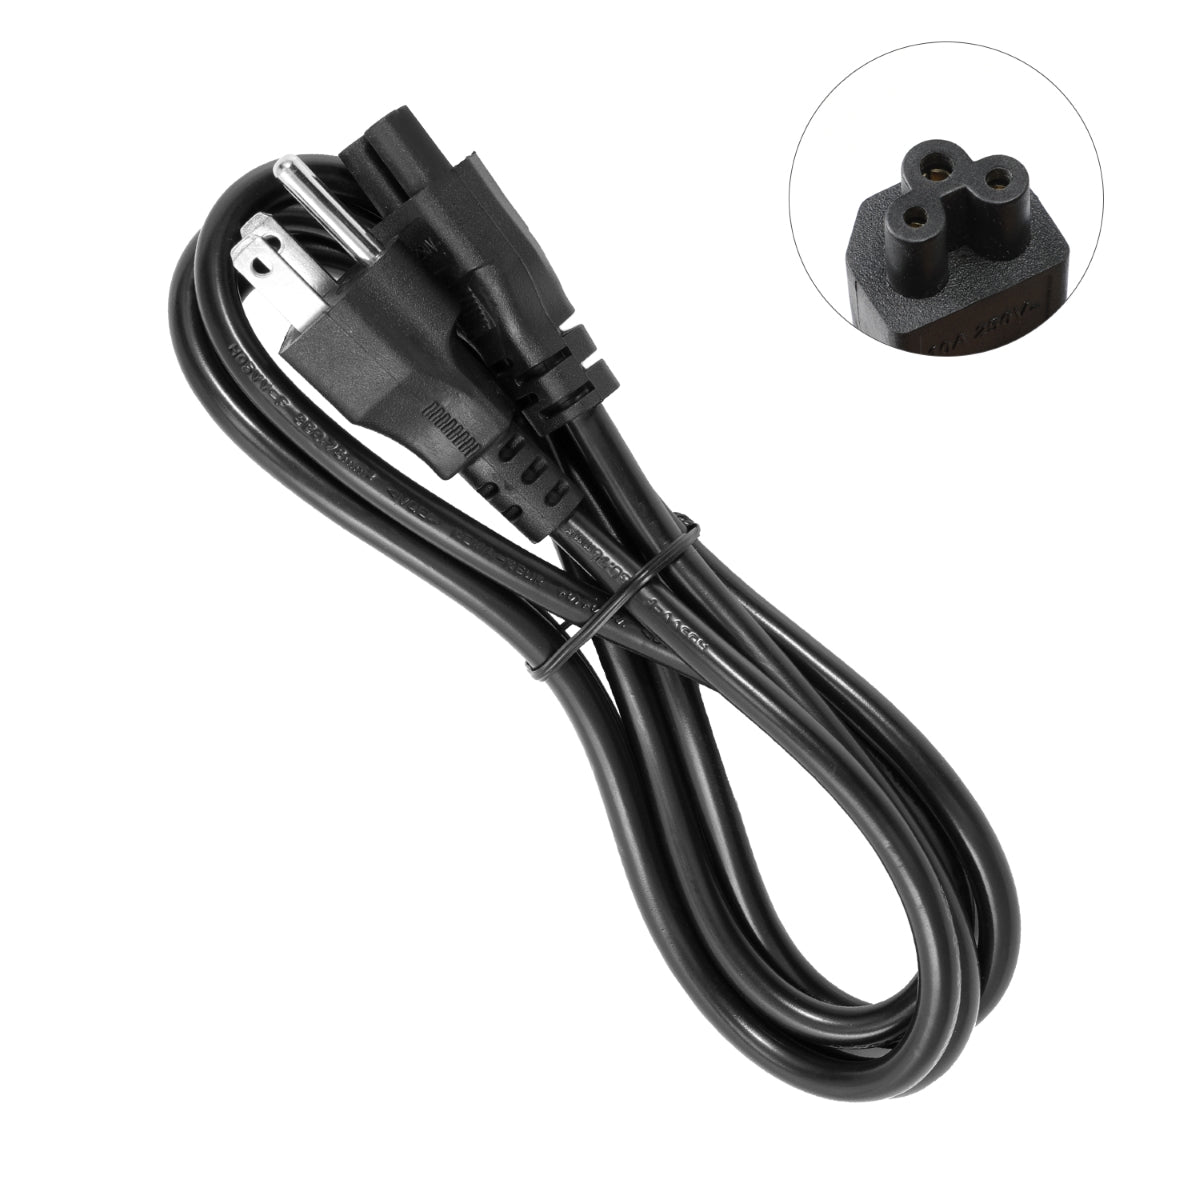 Power Cord for LG 49LB5550 Monitor.